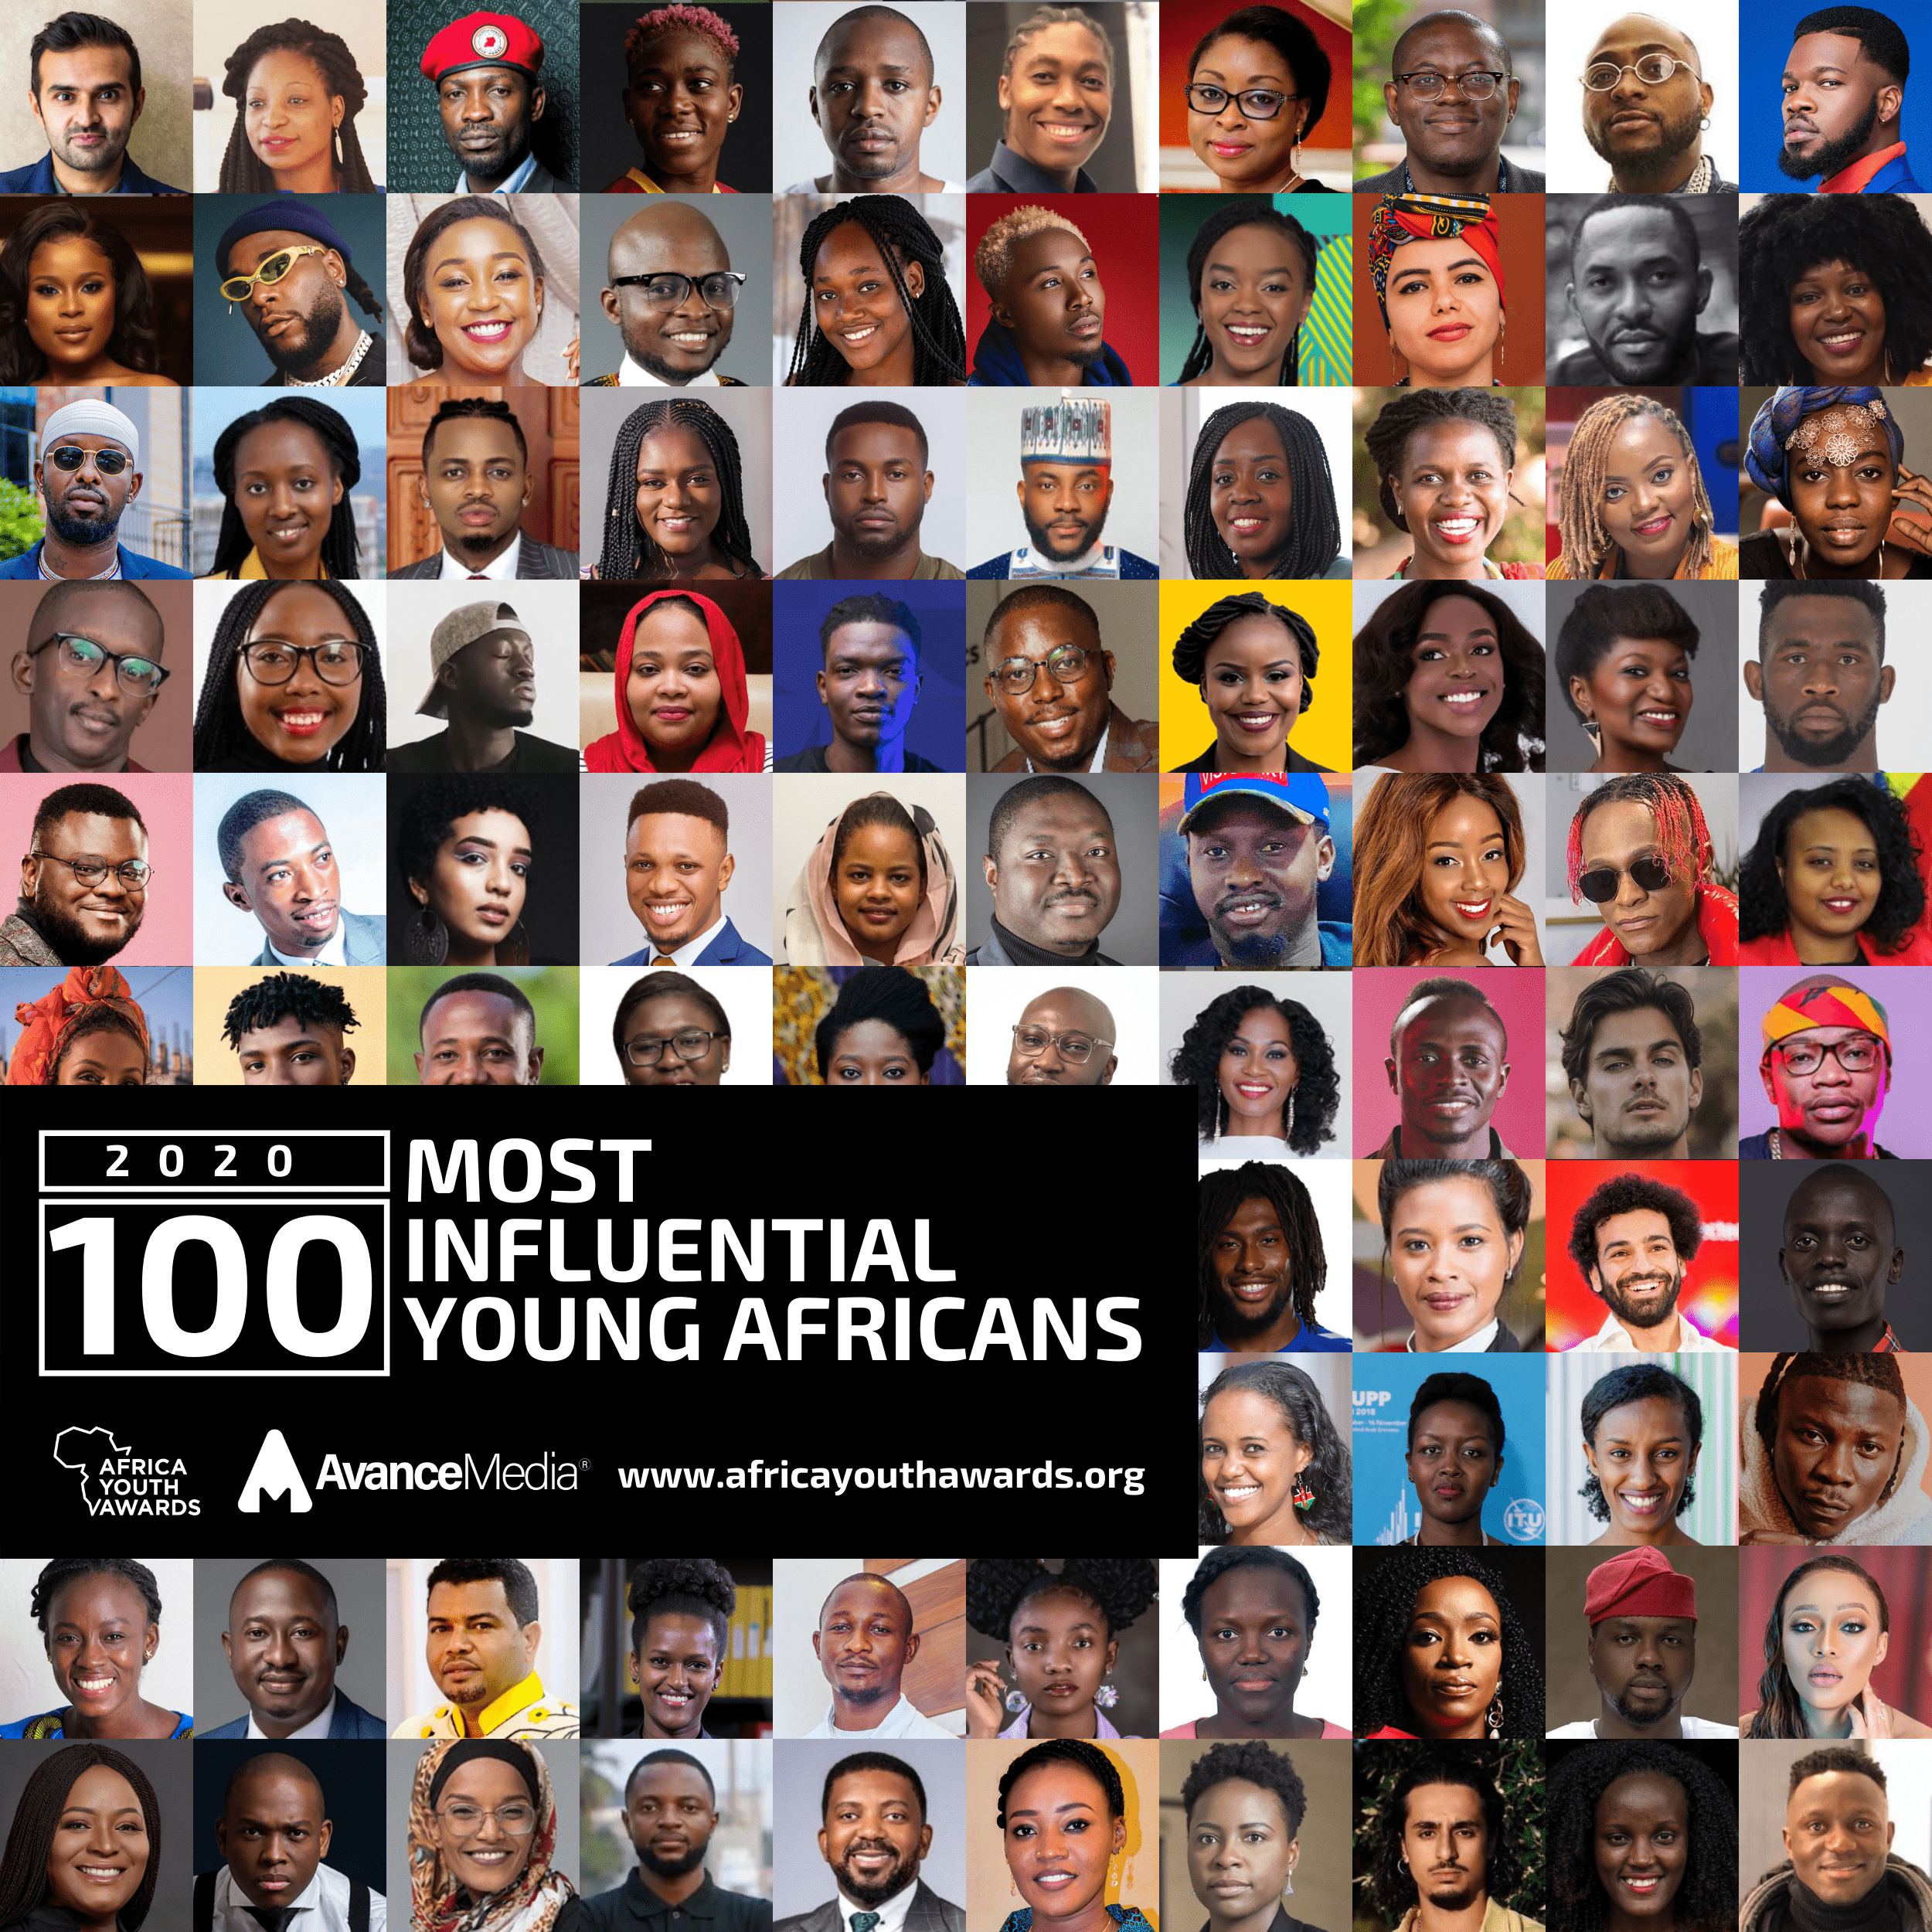 100 Most Influential Young Africans 2020 list announced